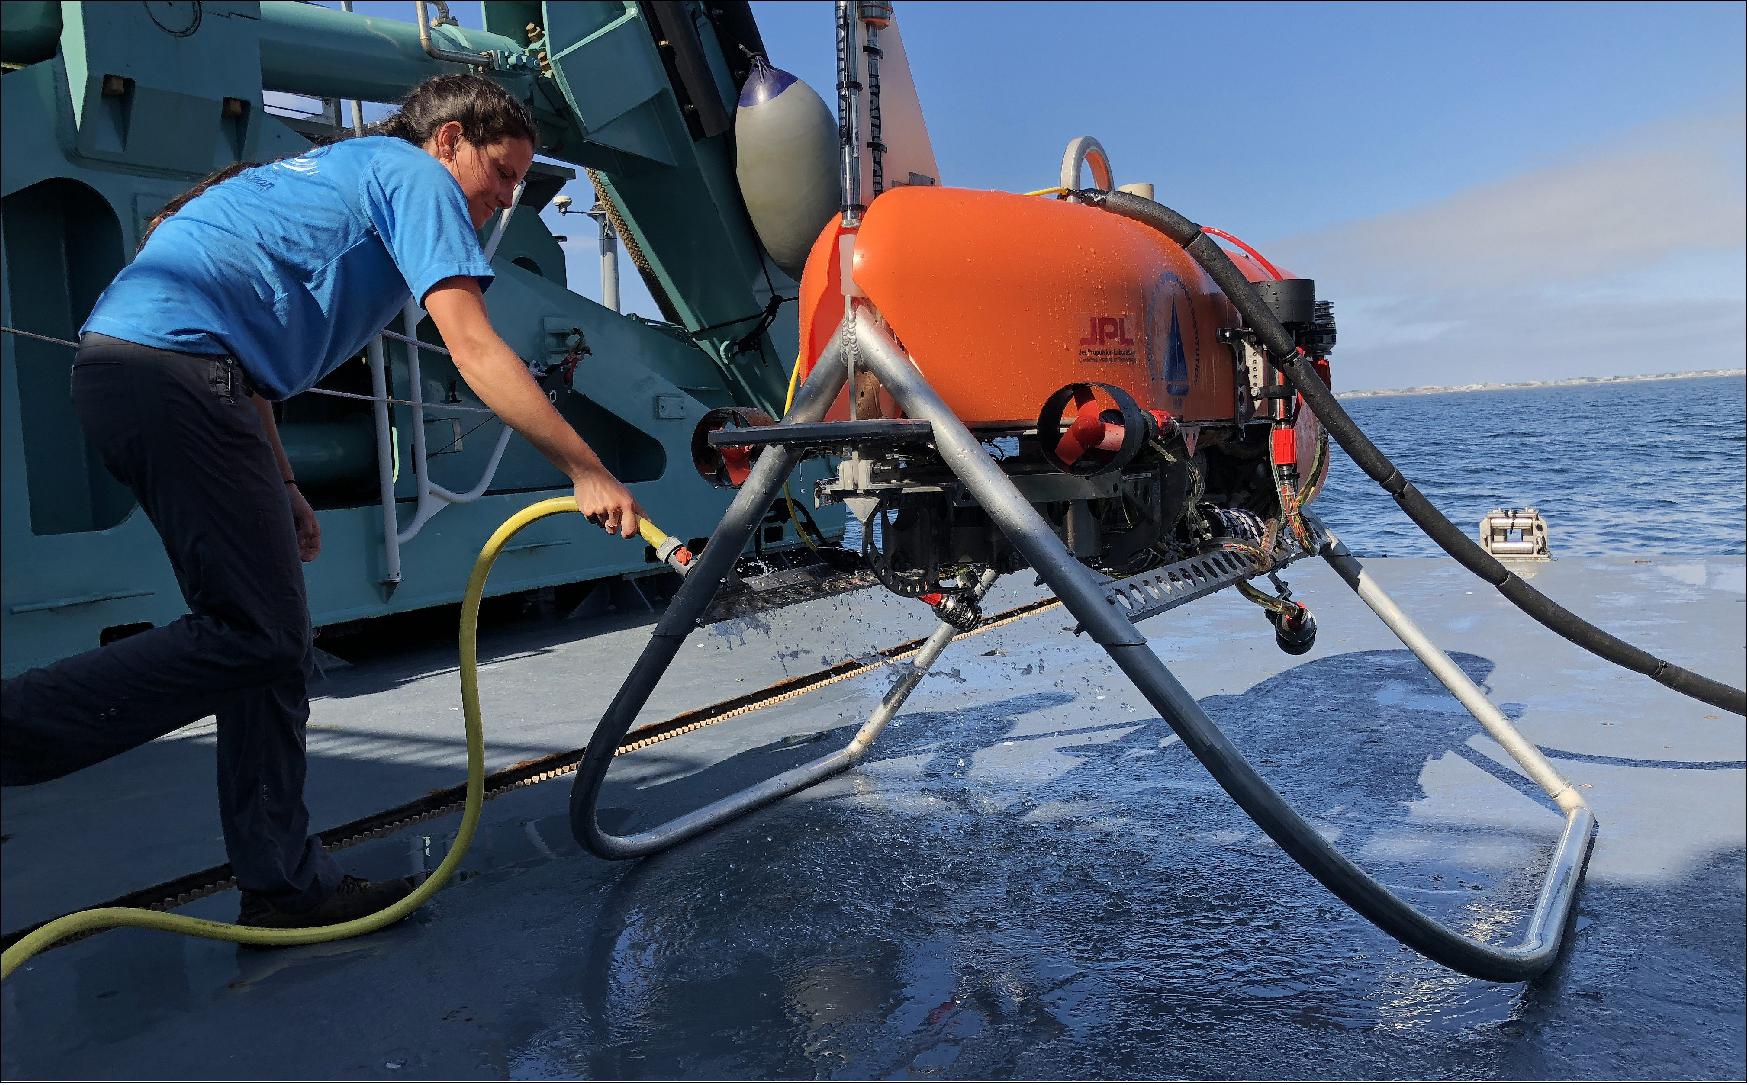 Figure 4: The Orpheus submersible robot was developed by Woods Hole Oceanographic Institute and JPL to explore the deep ocean autonomously (image credit: NASA/JPL-Caltech)